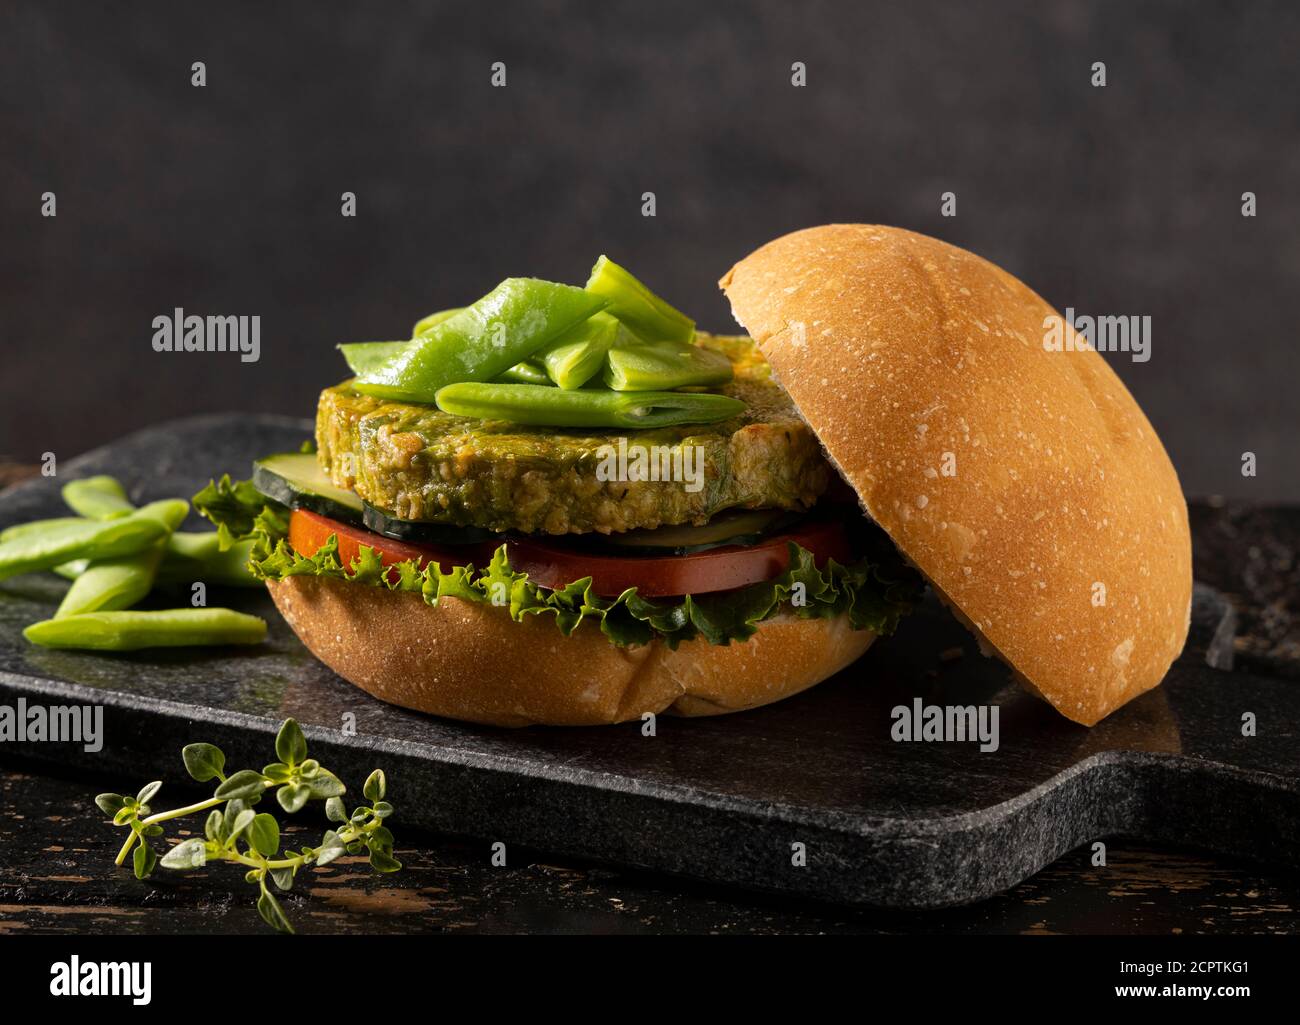 Vegan hamburger made with green beans and chickpeas, served with tomato, cucumber and lettuce. Stock Photo